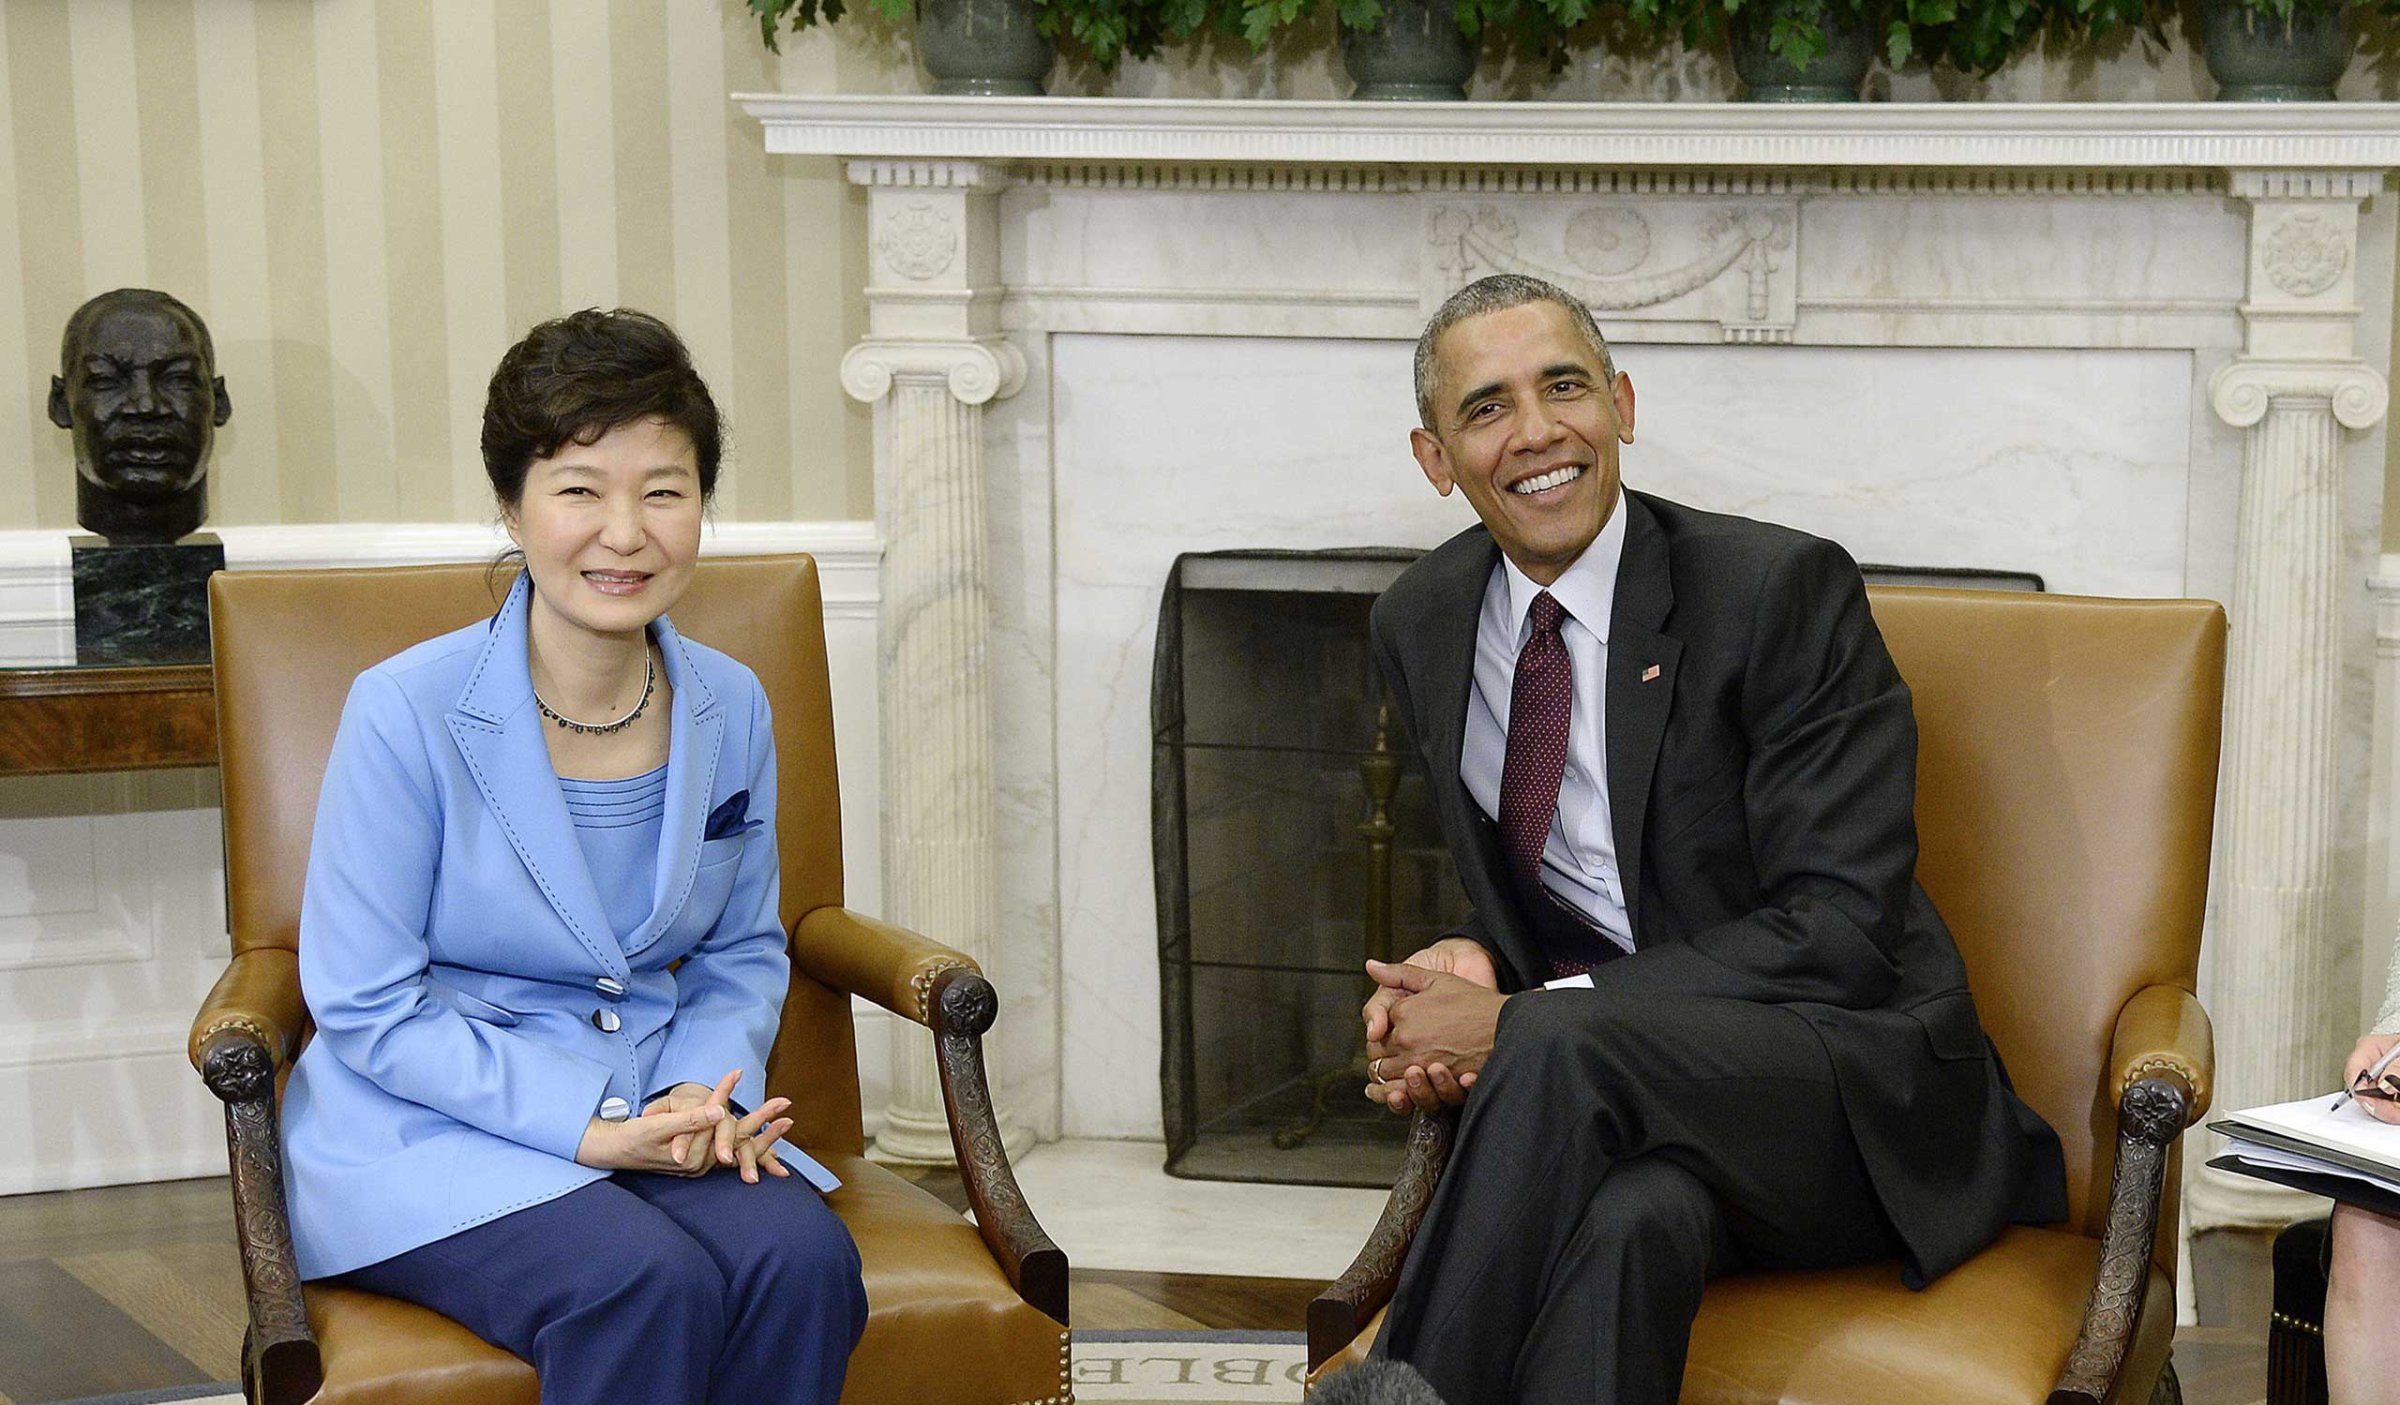 President Obama Meets With President Park Geun-hye of the Republic of Korea